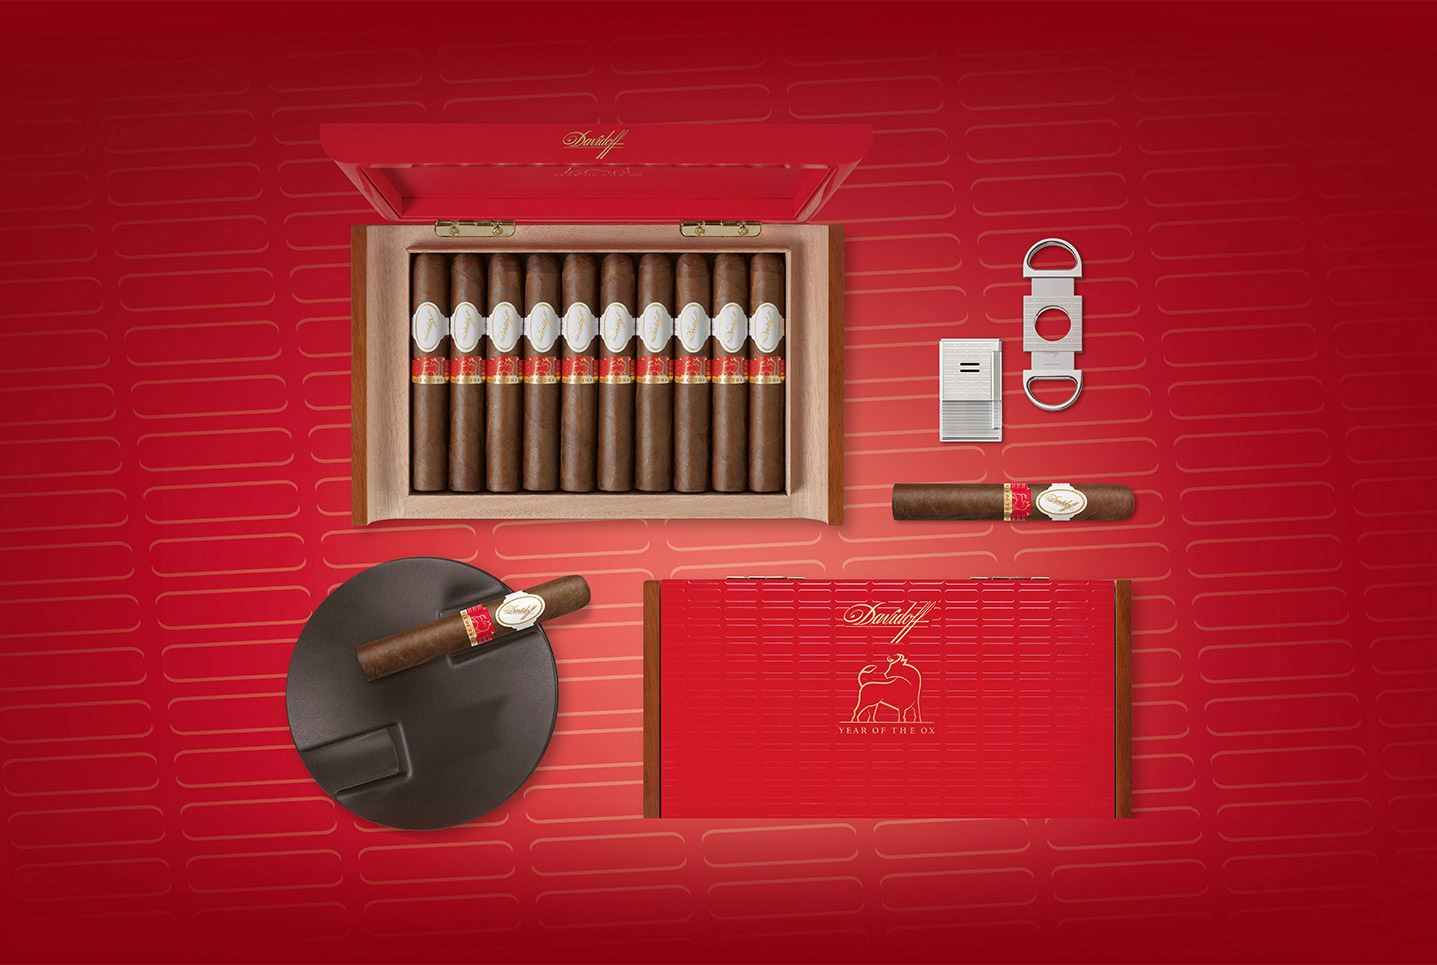 The Davidoff Cigars Year of the Ox Collection overview